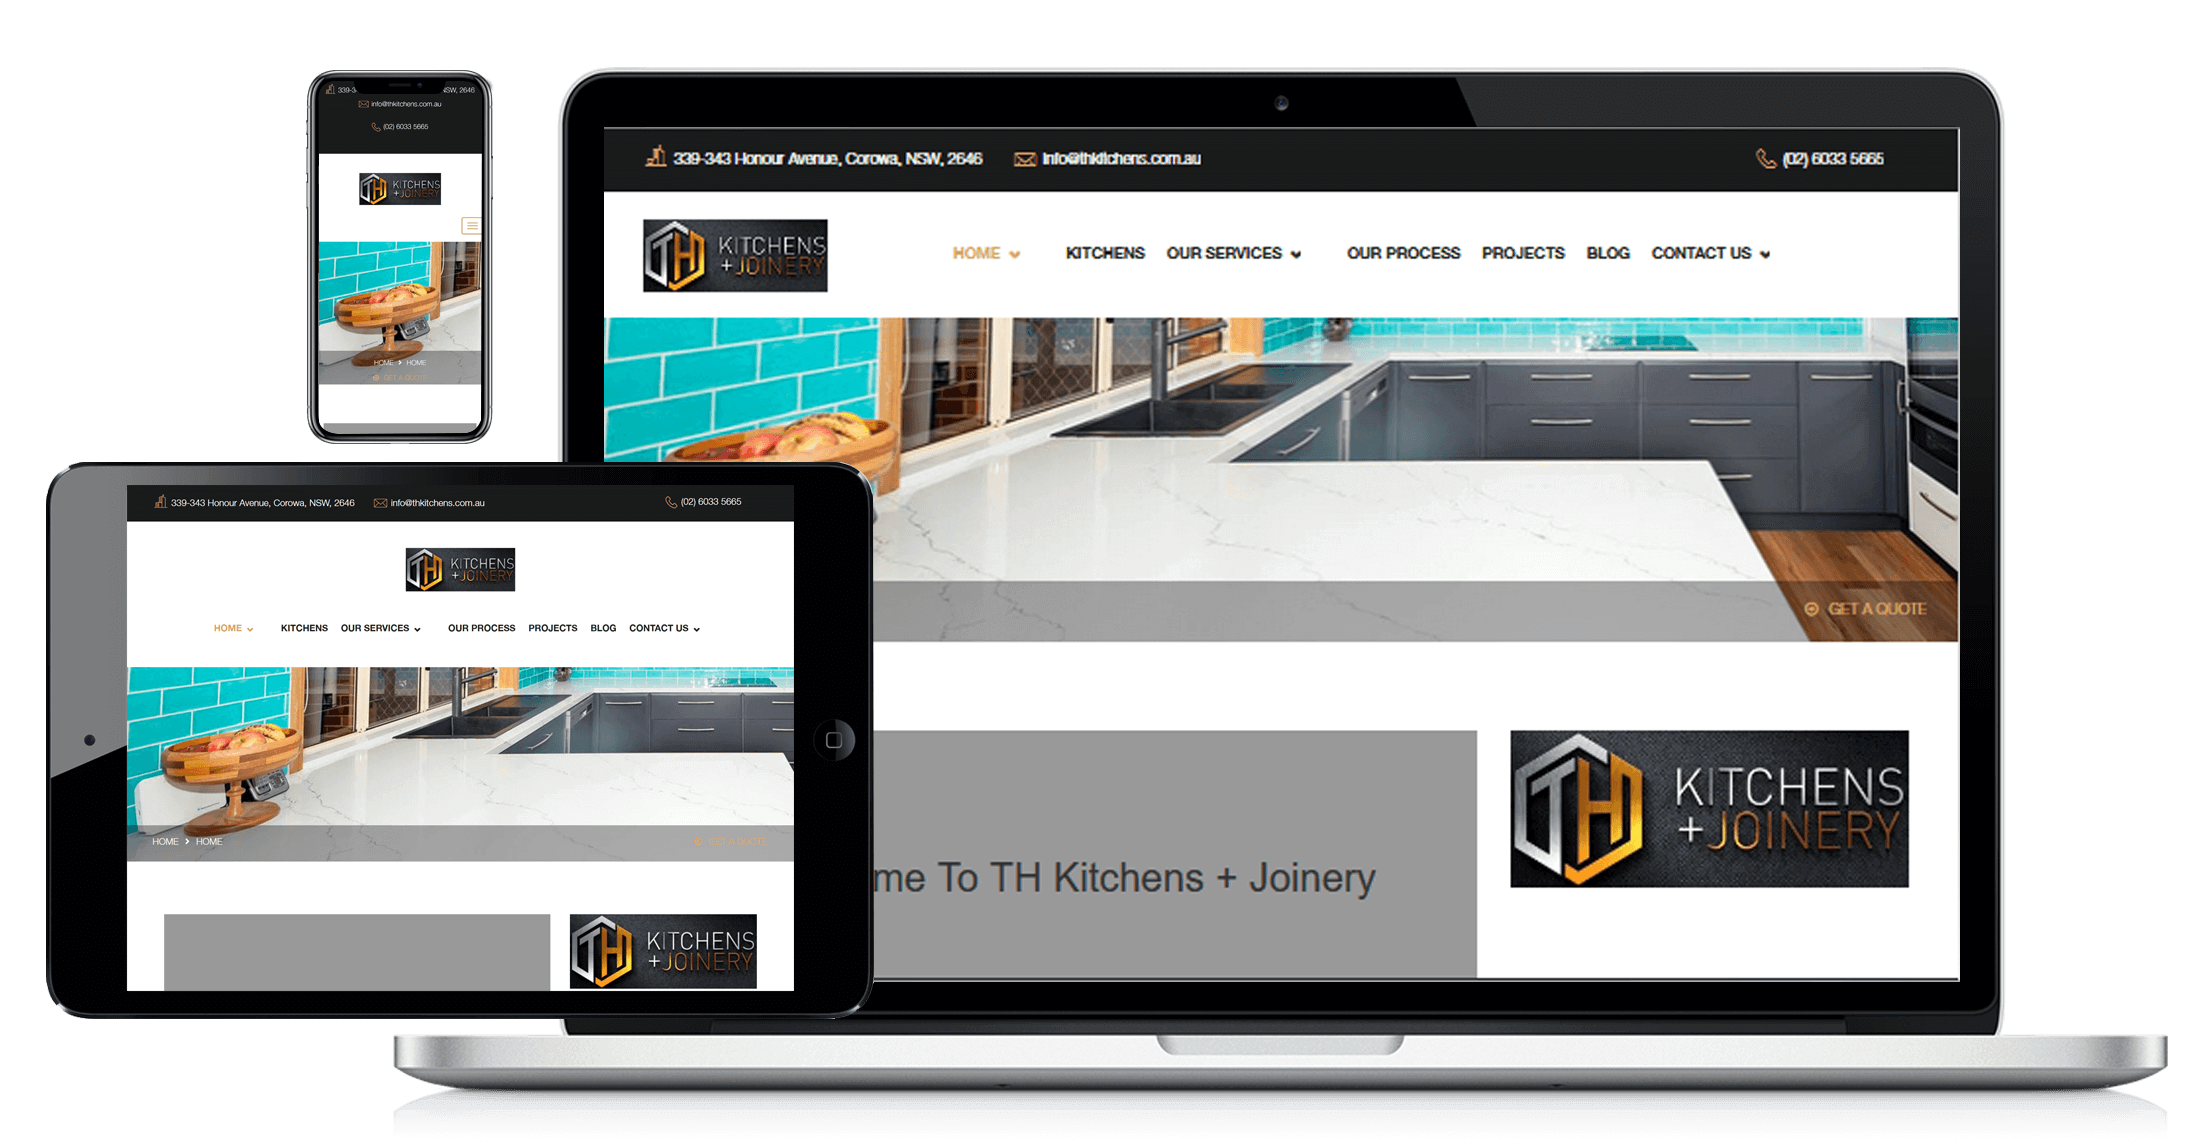 TH Kitchens & Joinery